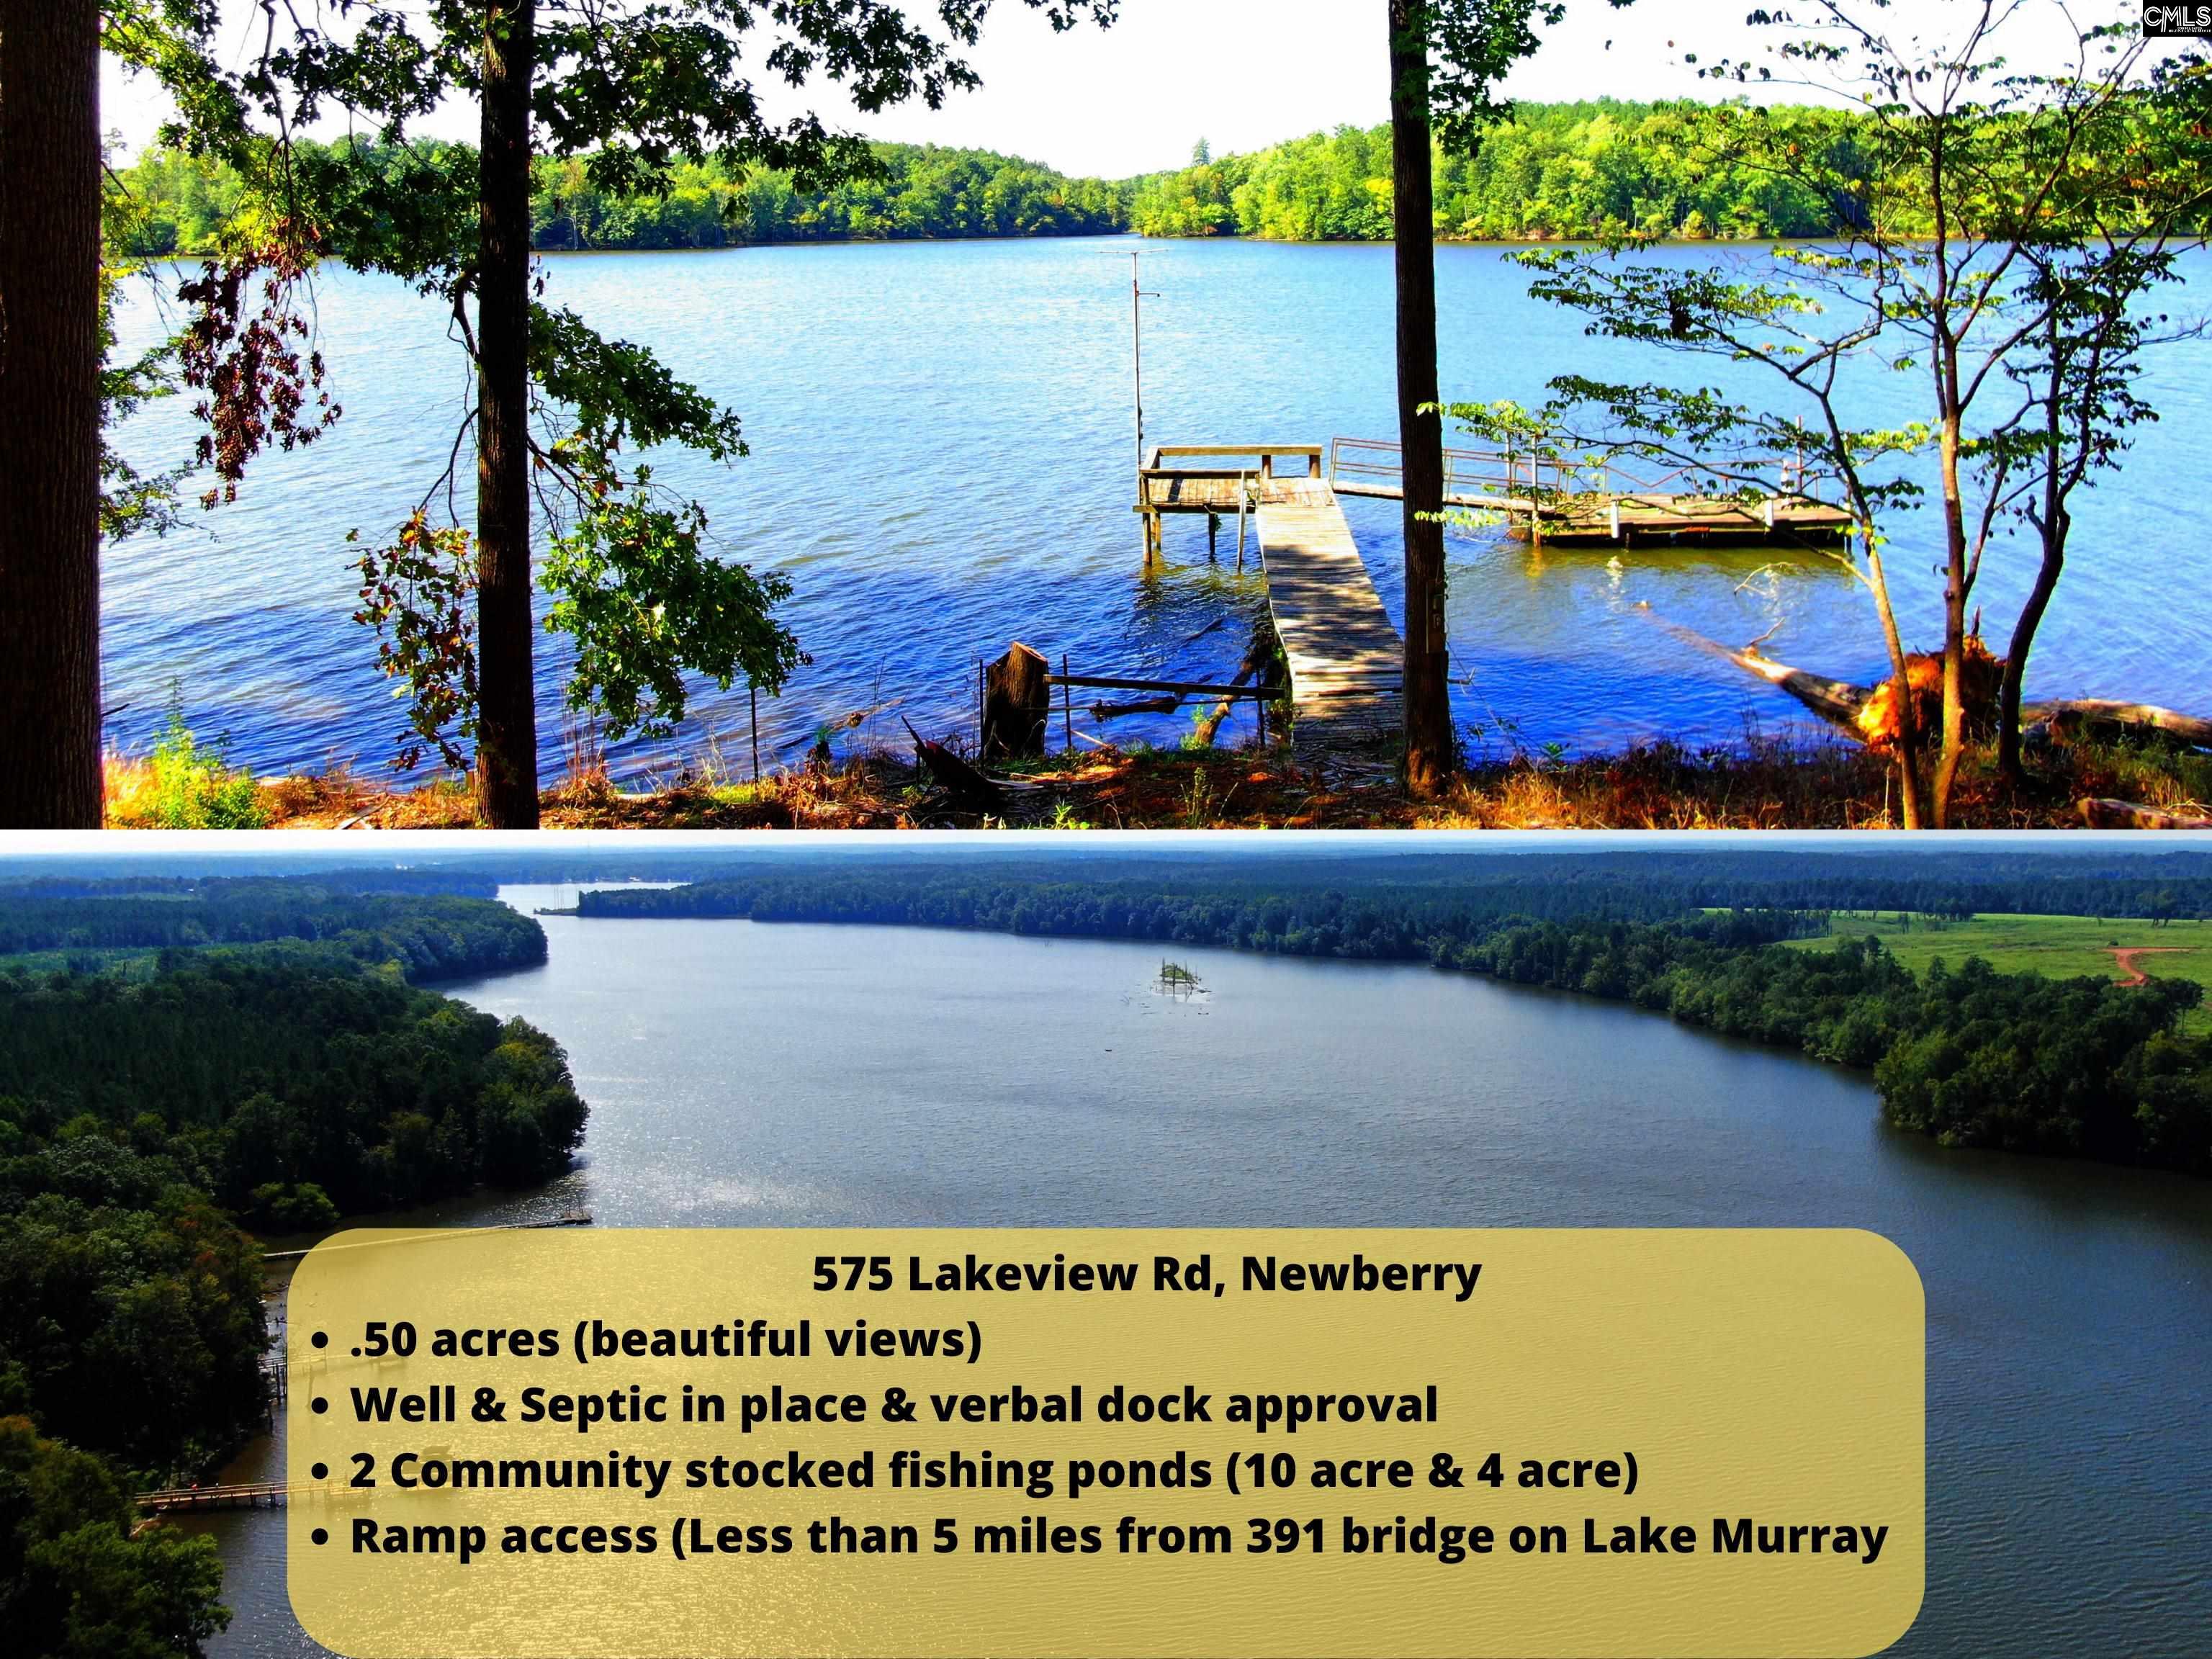 Lakeview Road Newberry, SC 29108